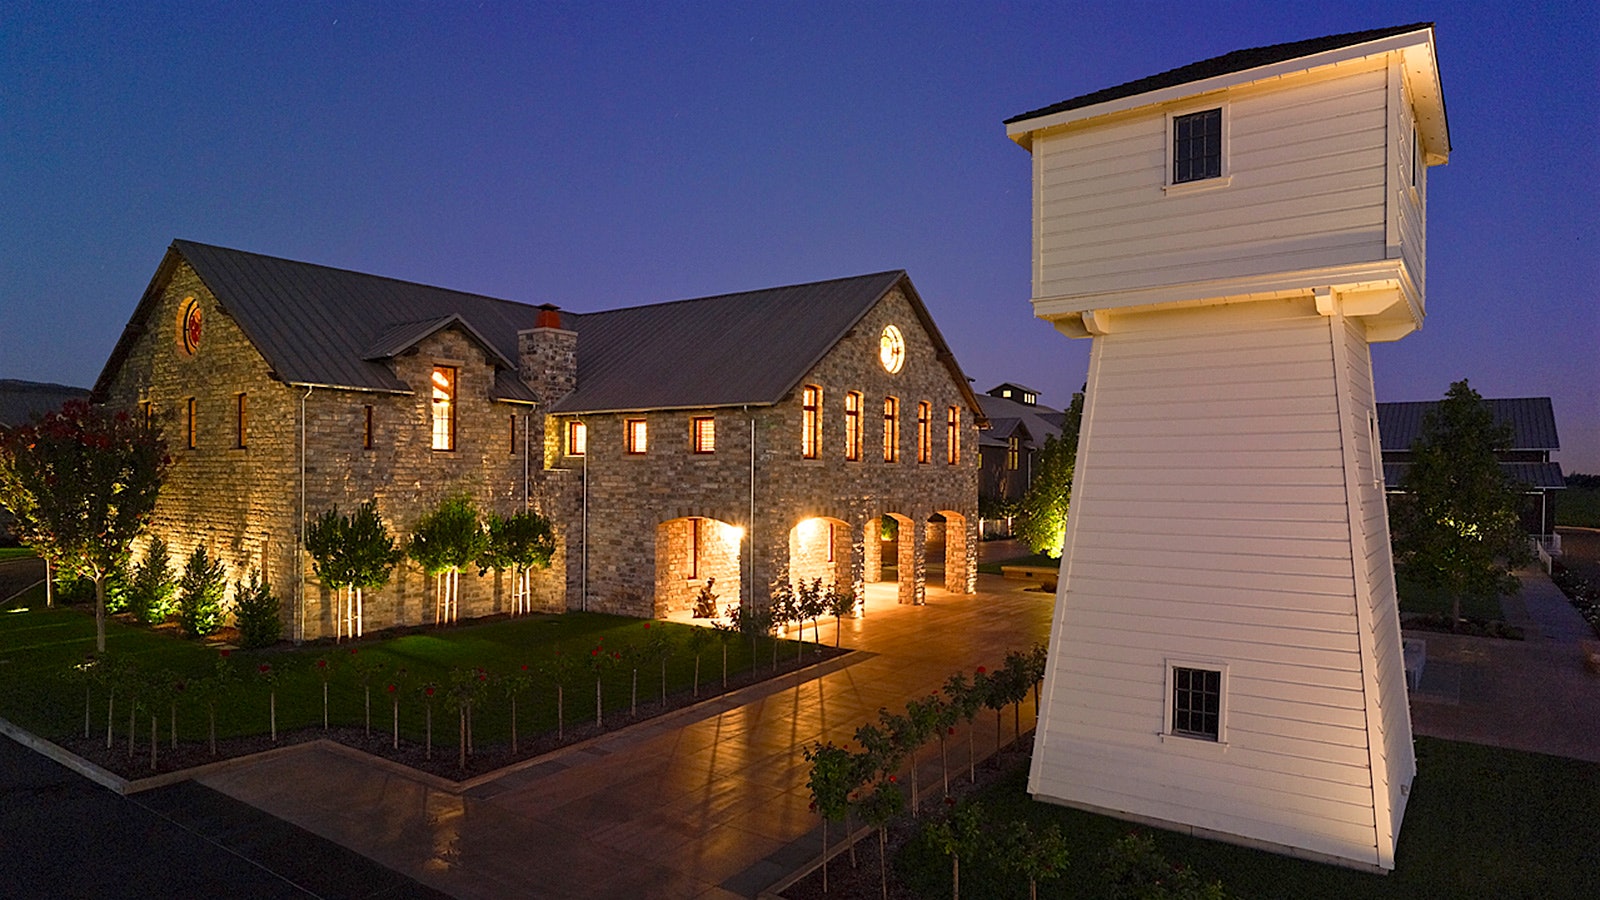     Exterior of the Silver Oak cellar and its adjacent iconic white water tower